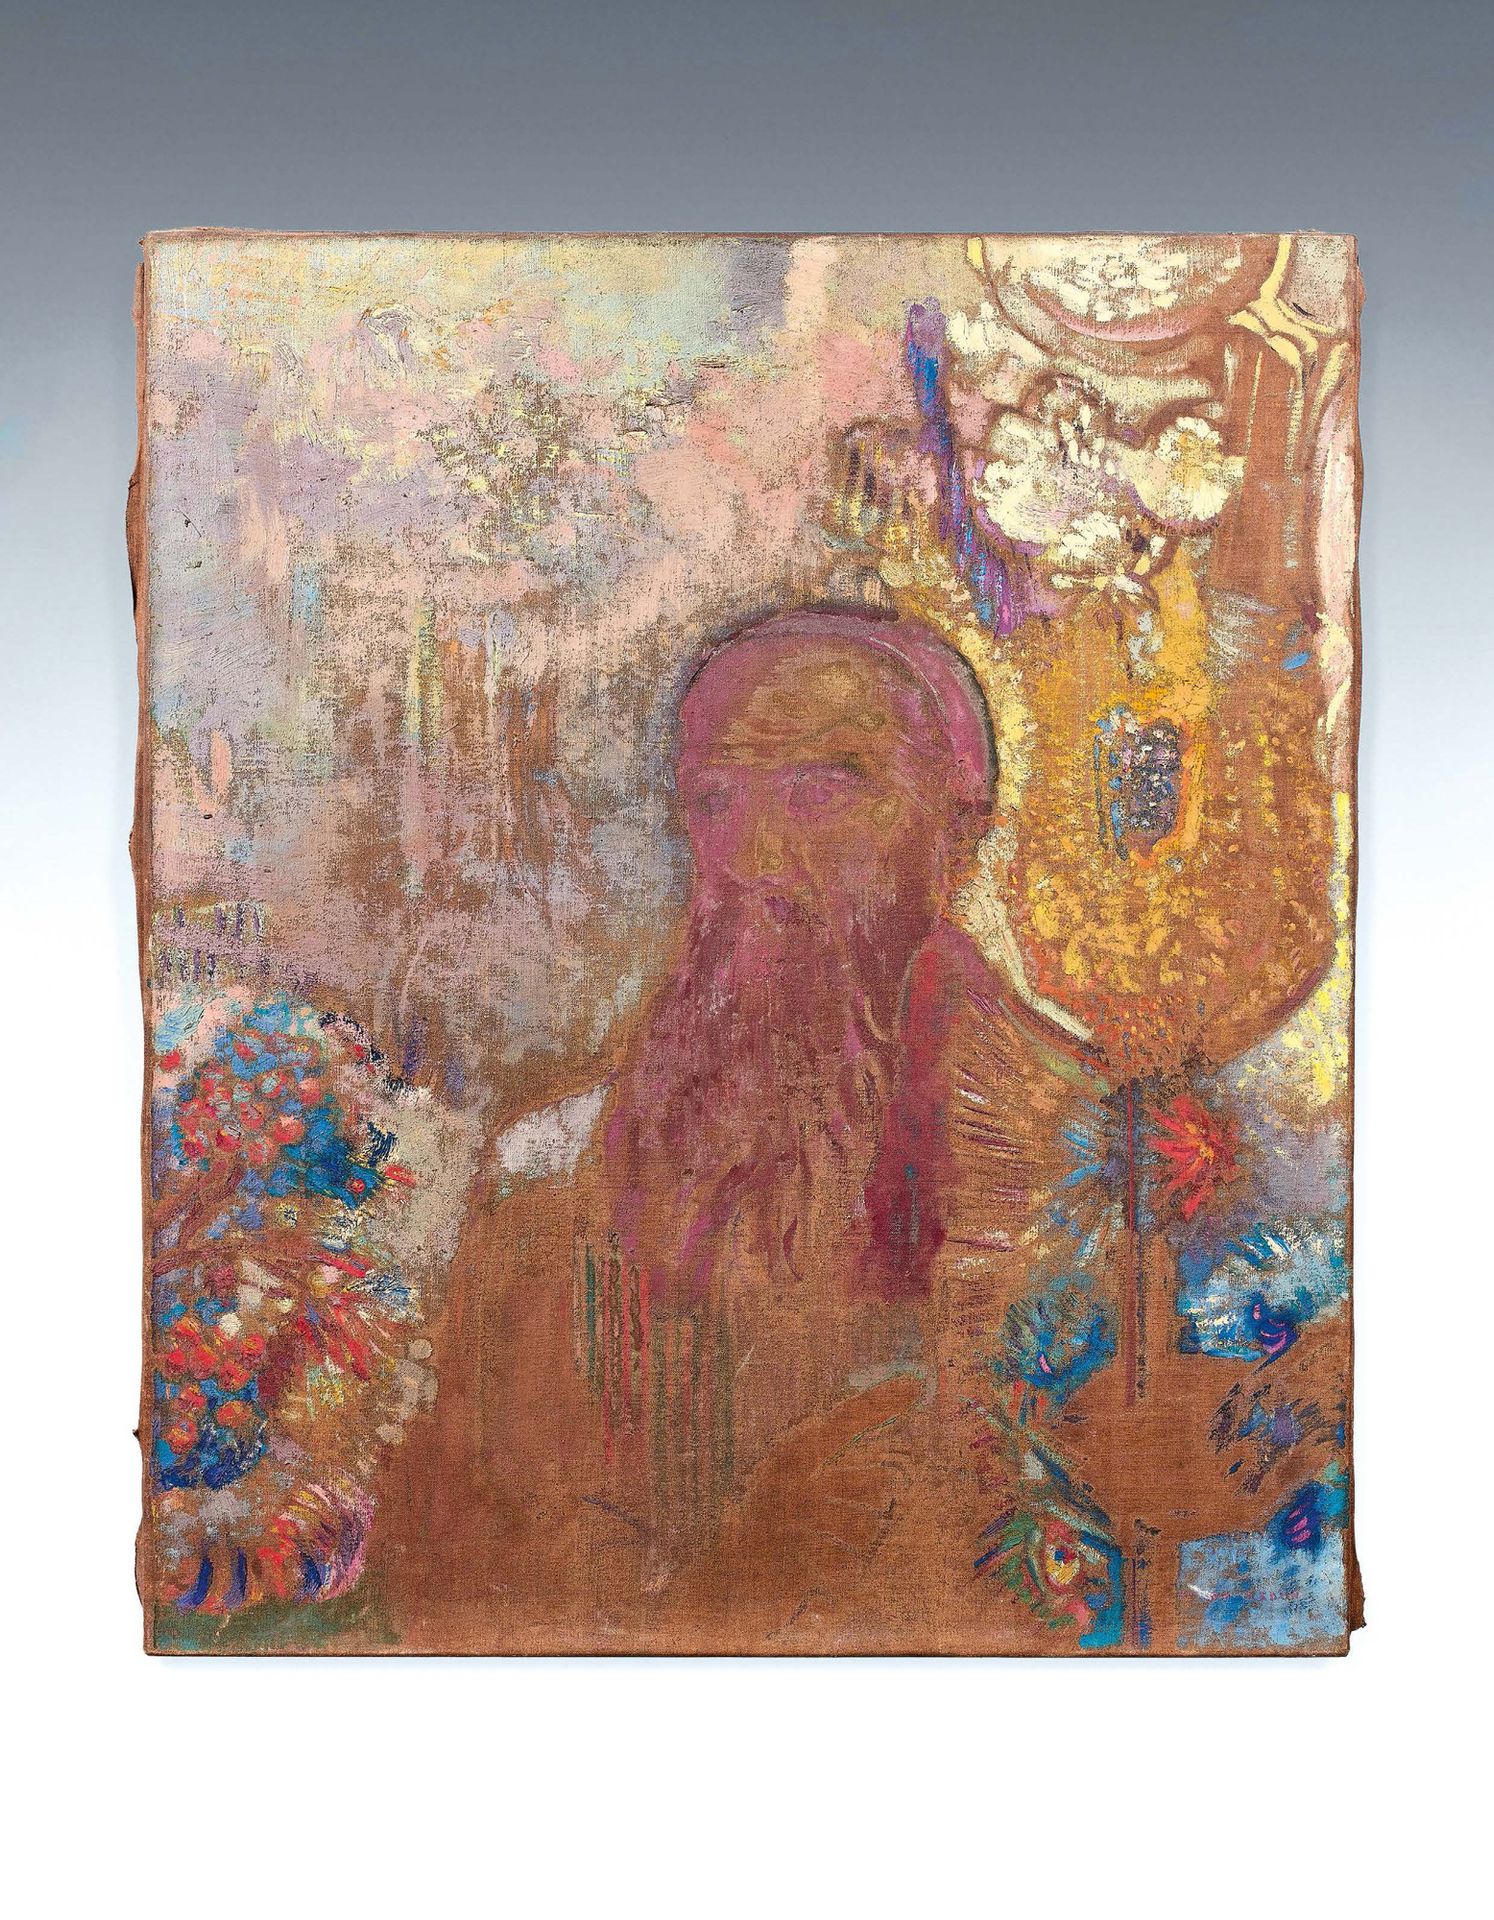 Odilon REDON (1840-1916) 
The prophet
Oil on canvas, signed lower right.
54 x 46&hellip;